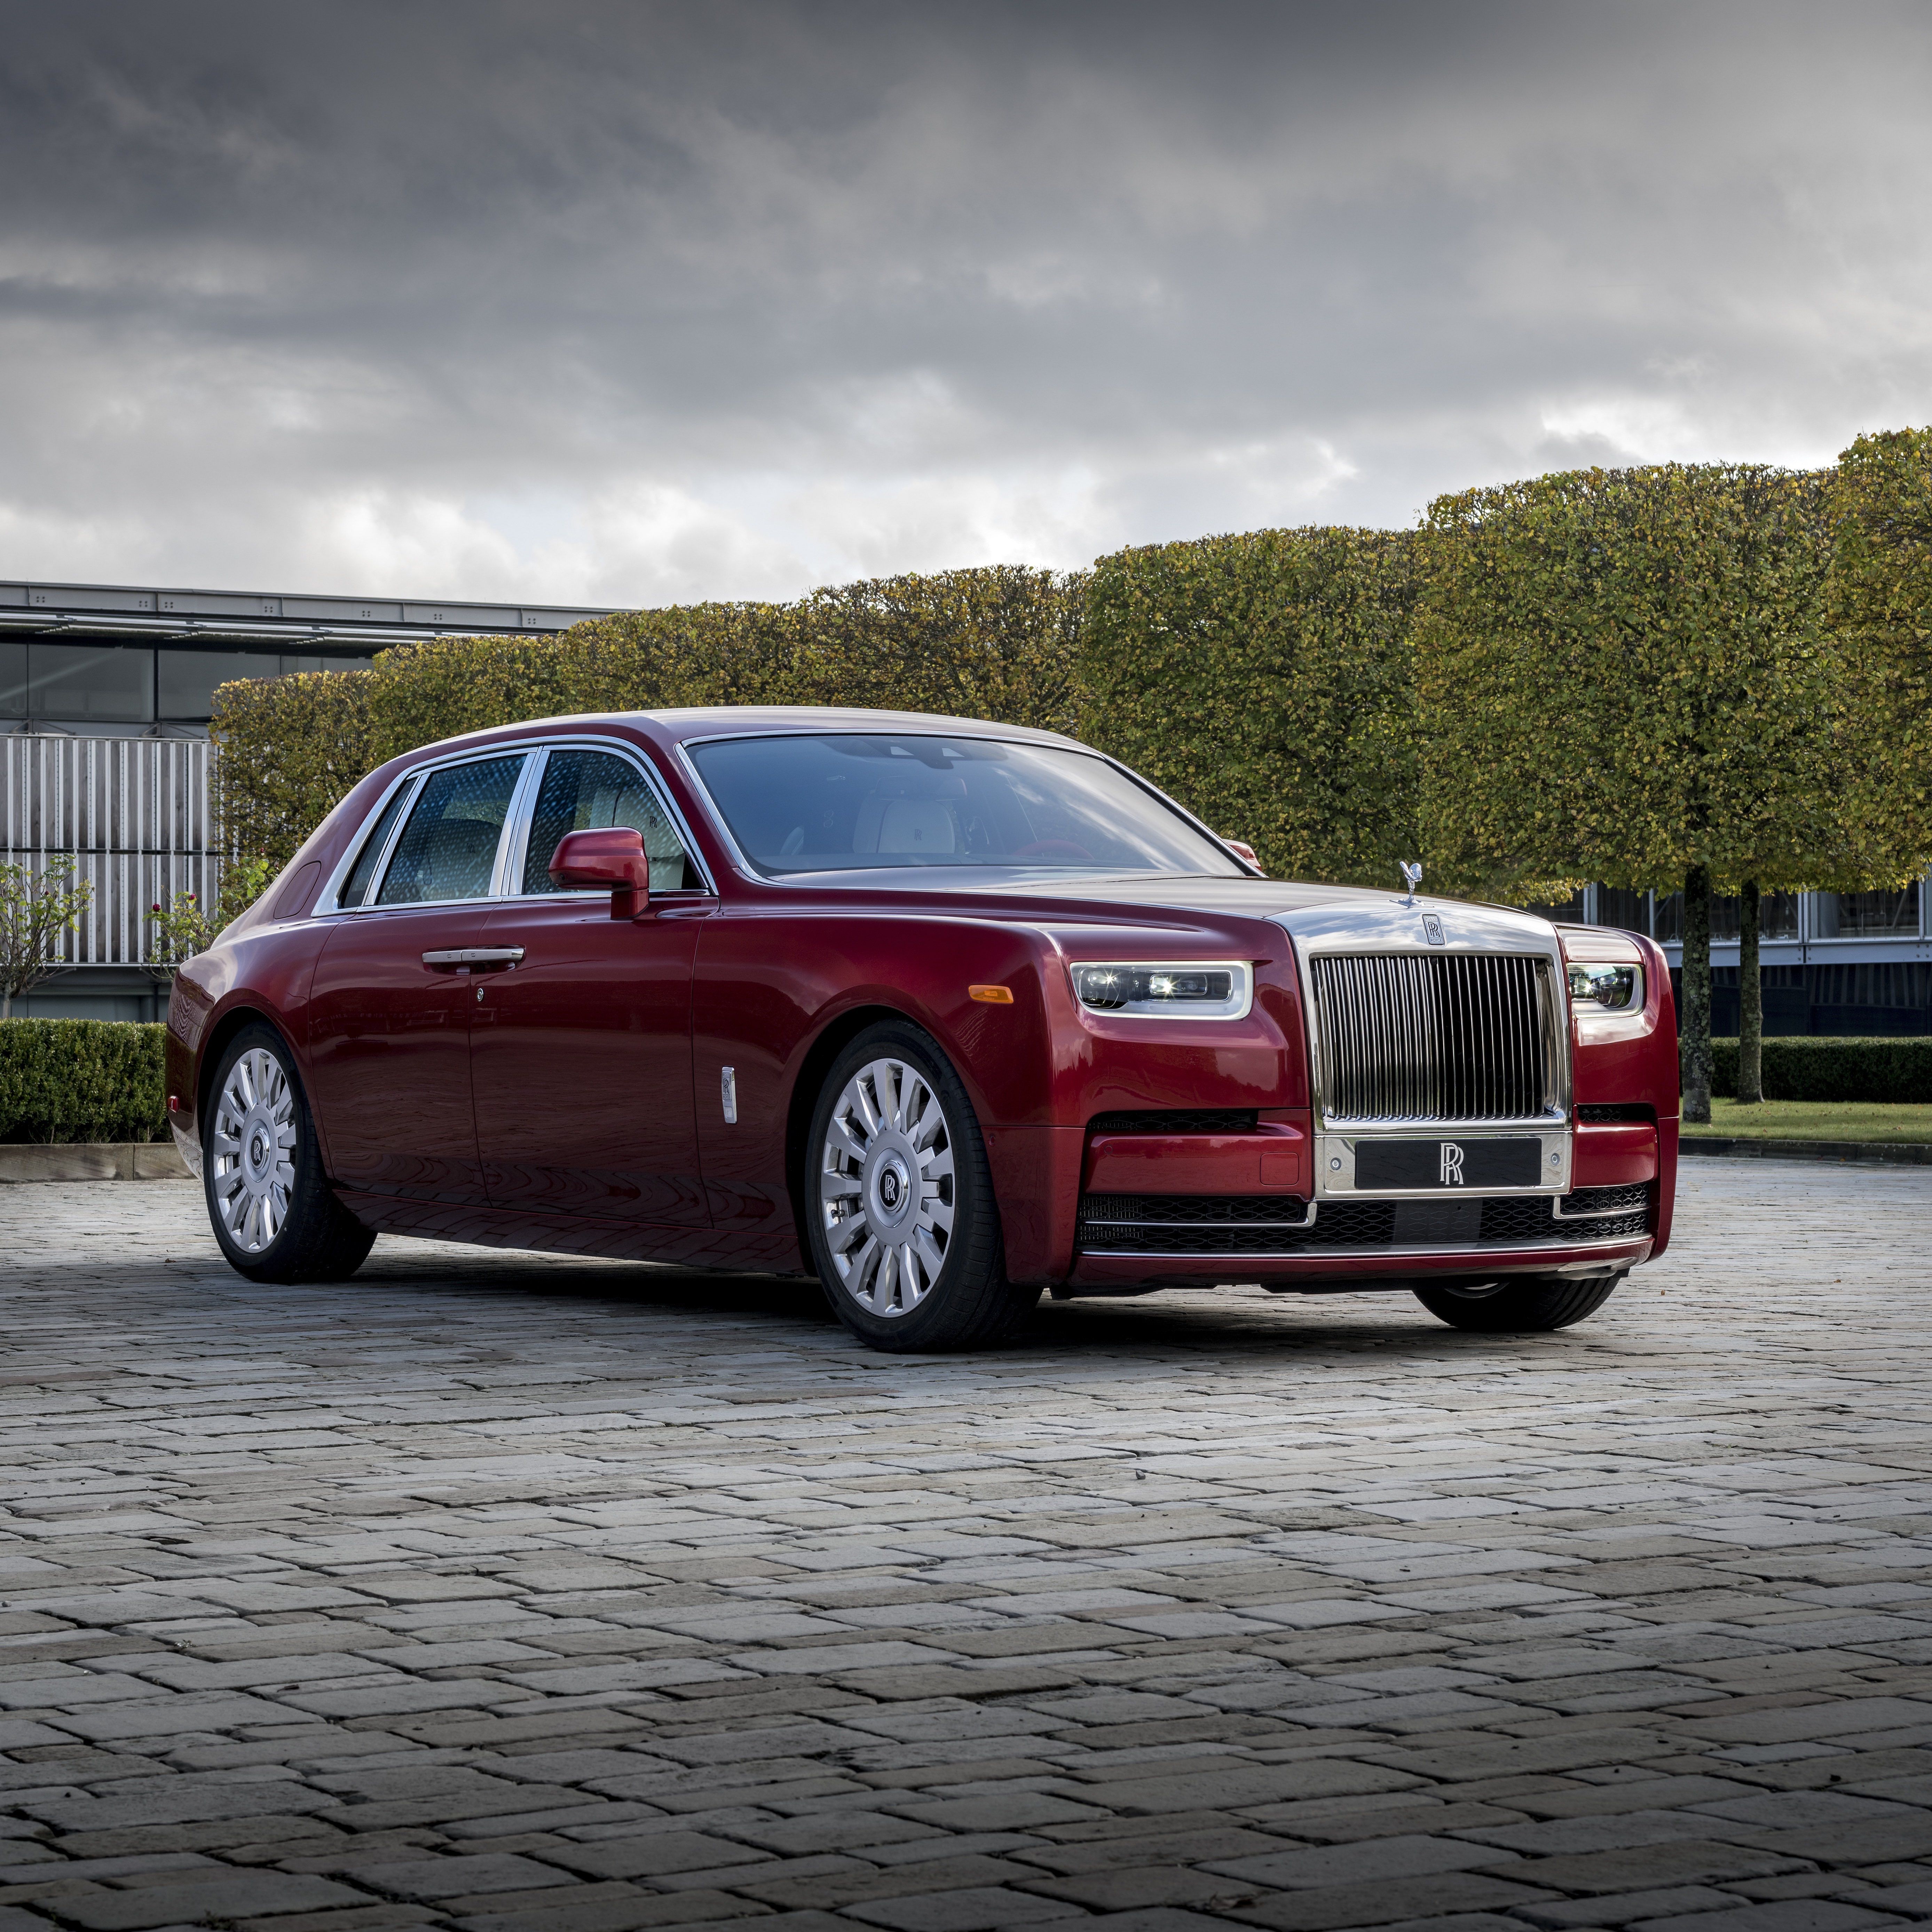 2020 Rolls-Royce Phantom Review, Pricing, and Specs